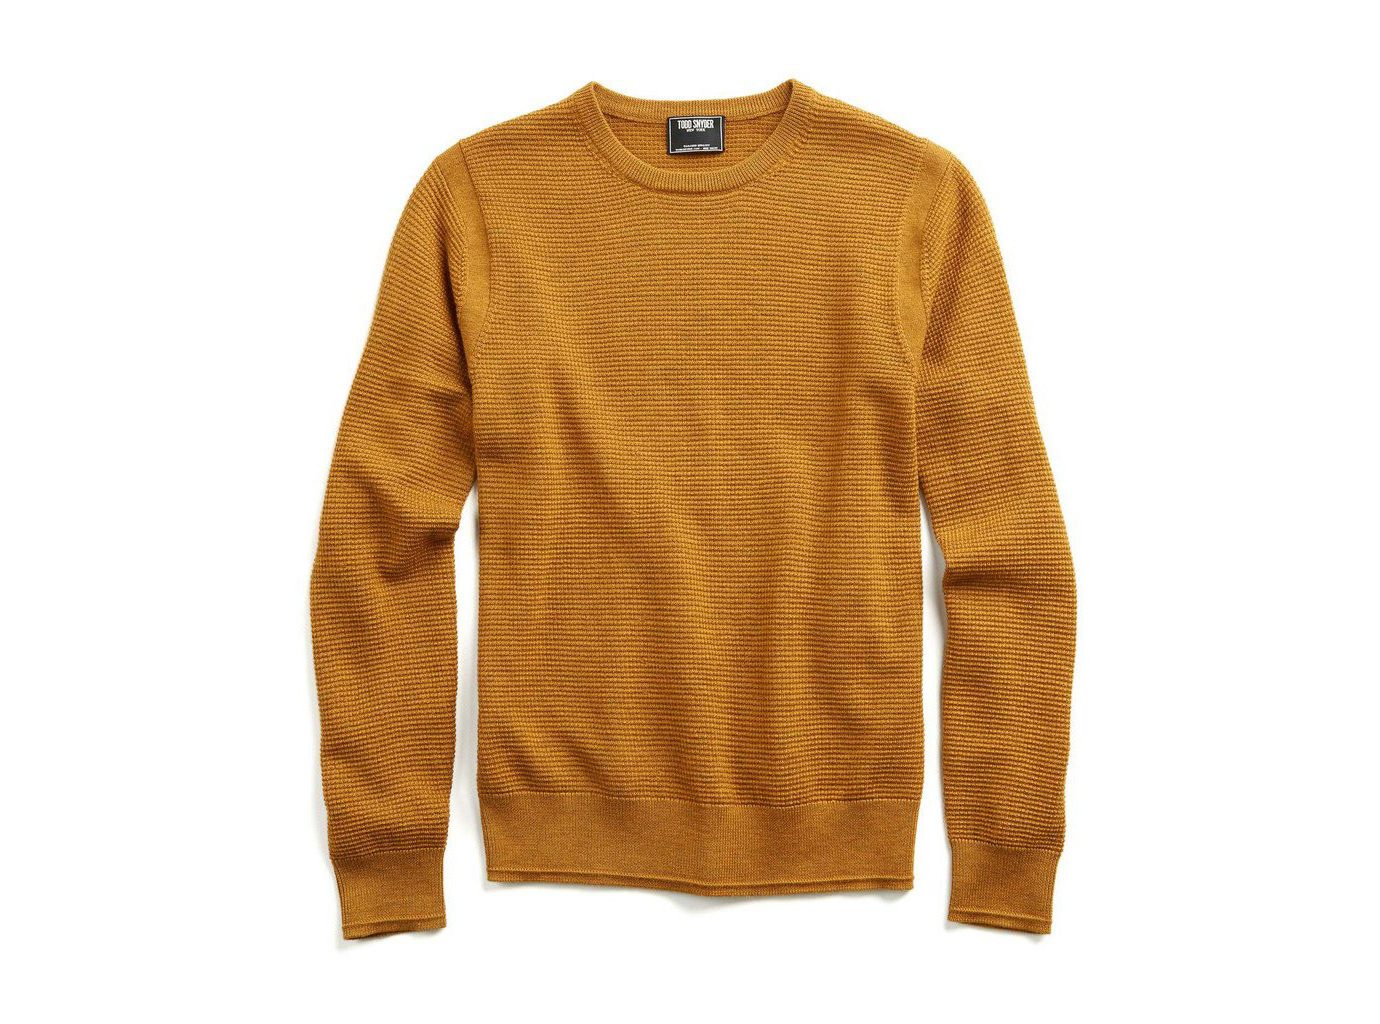 Style + Design Travel Shop man clothing yellow sweater sleeve product long sleeved t shirt woolen neck